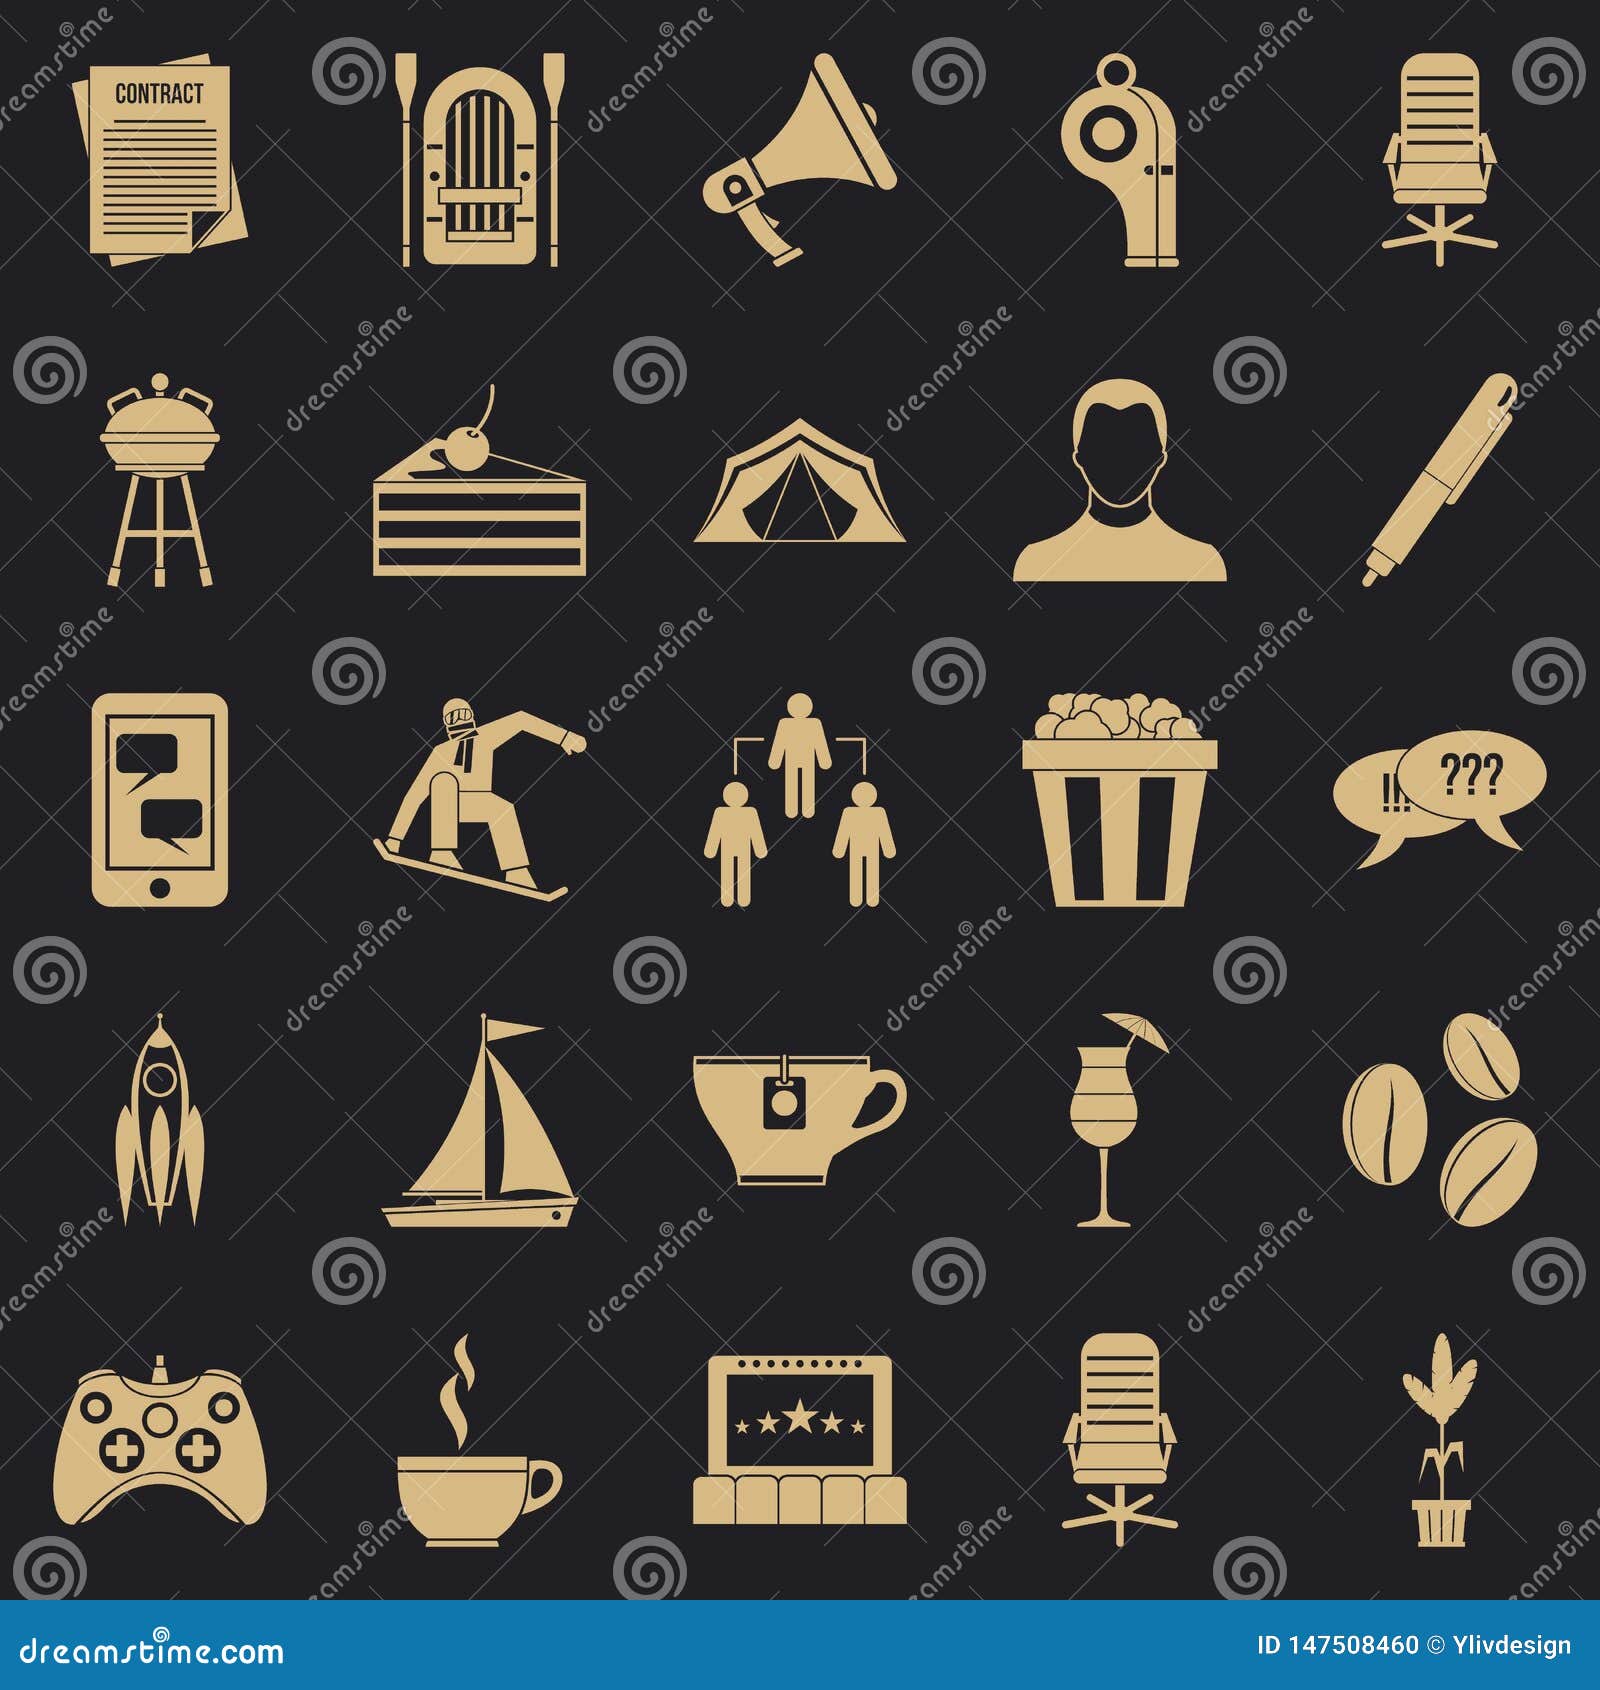 corporative icons set, simple style